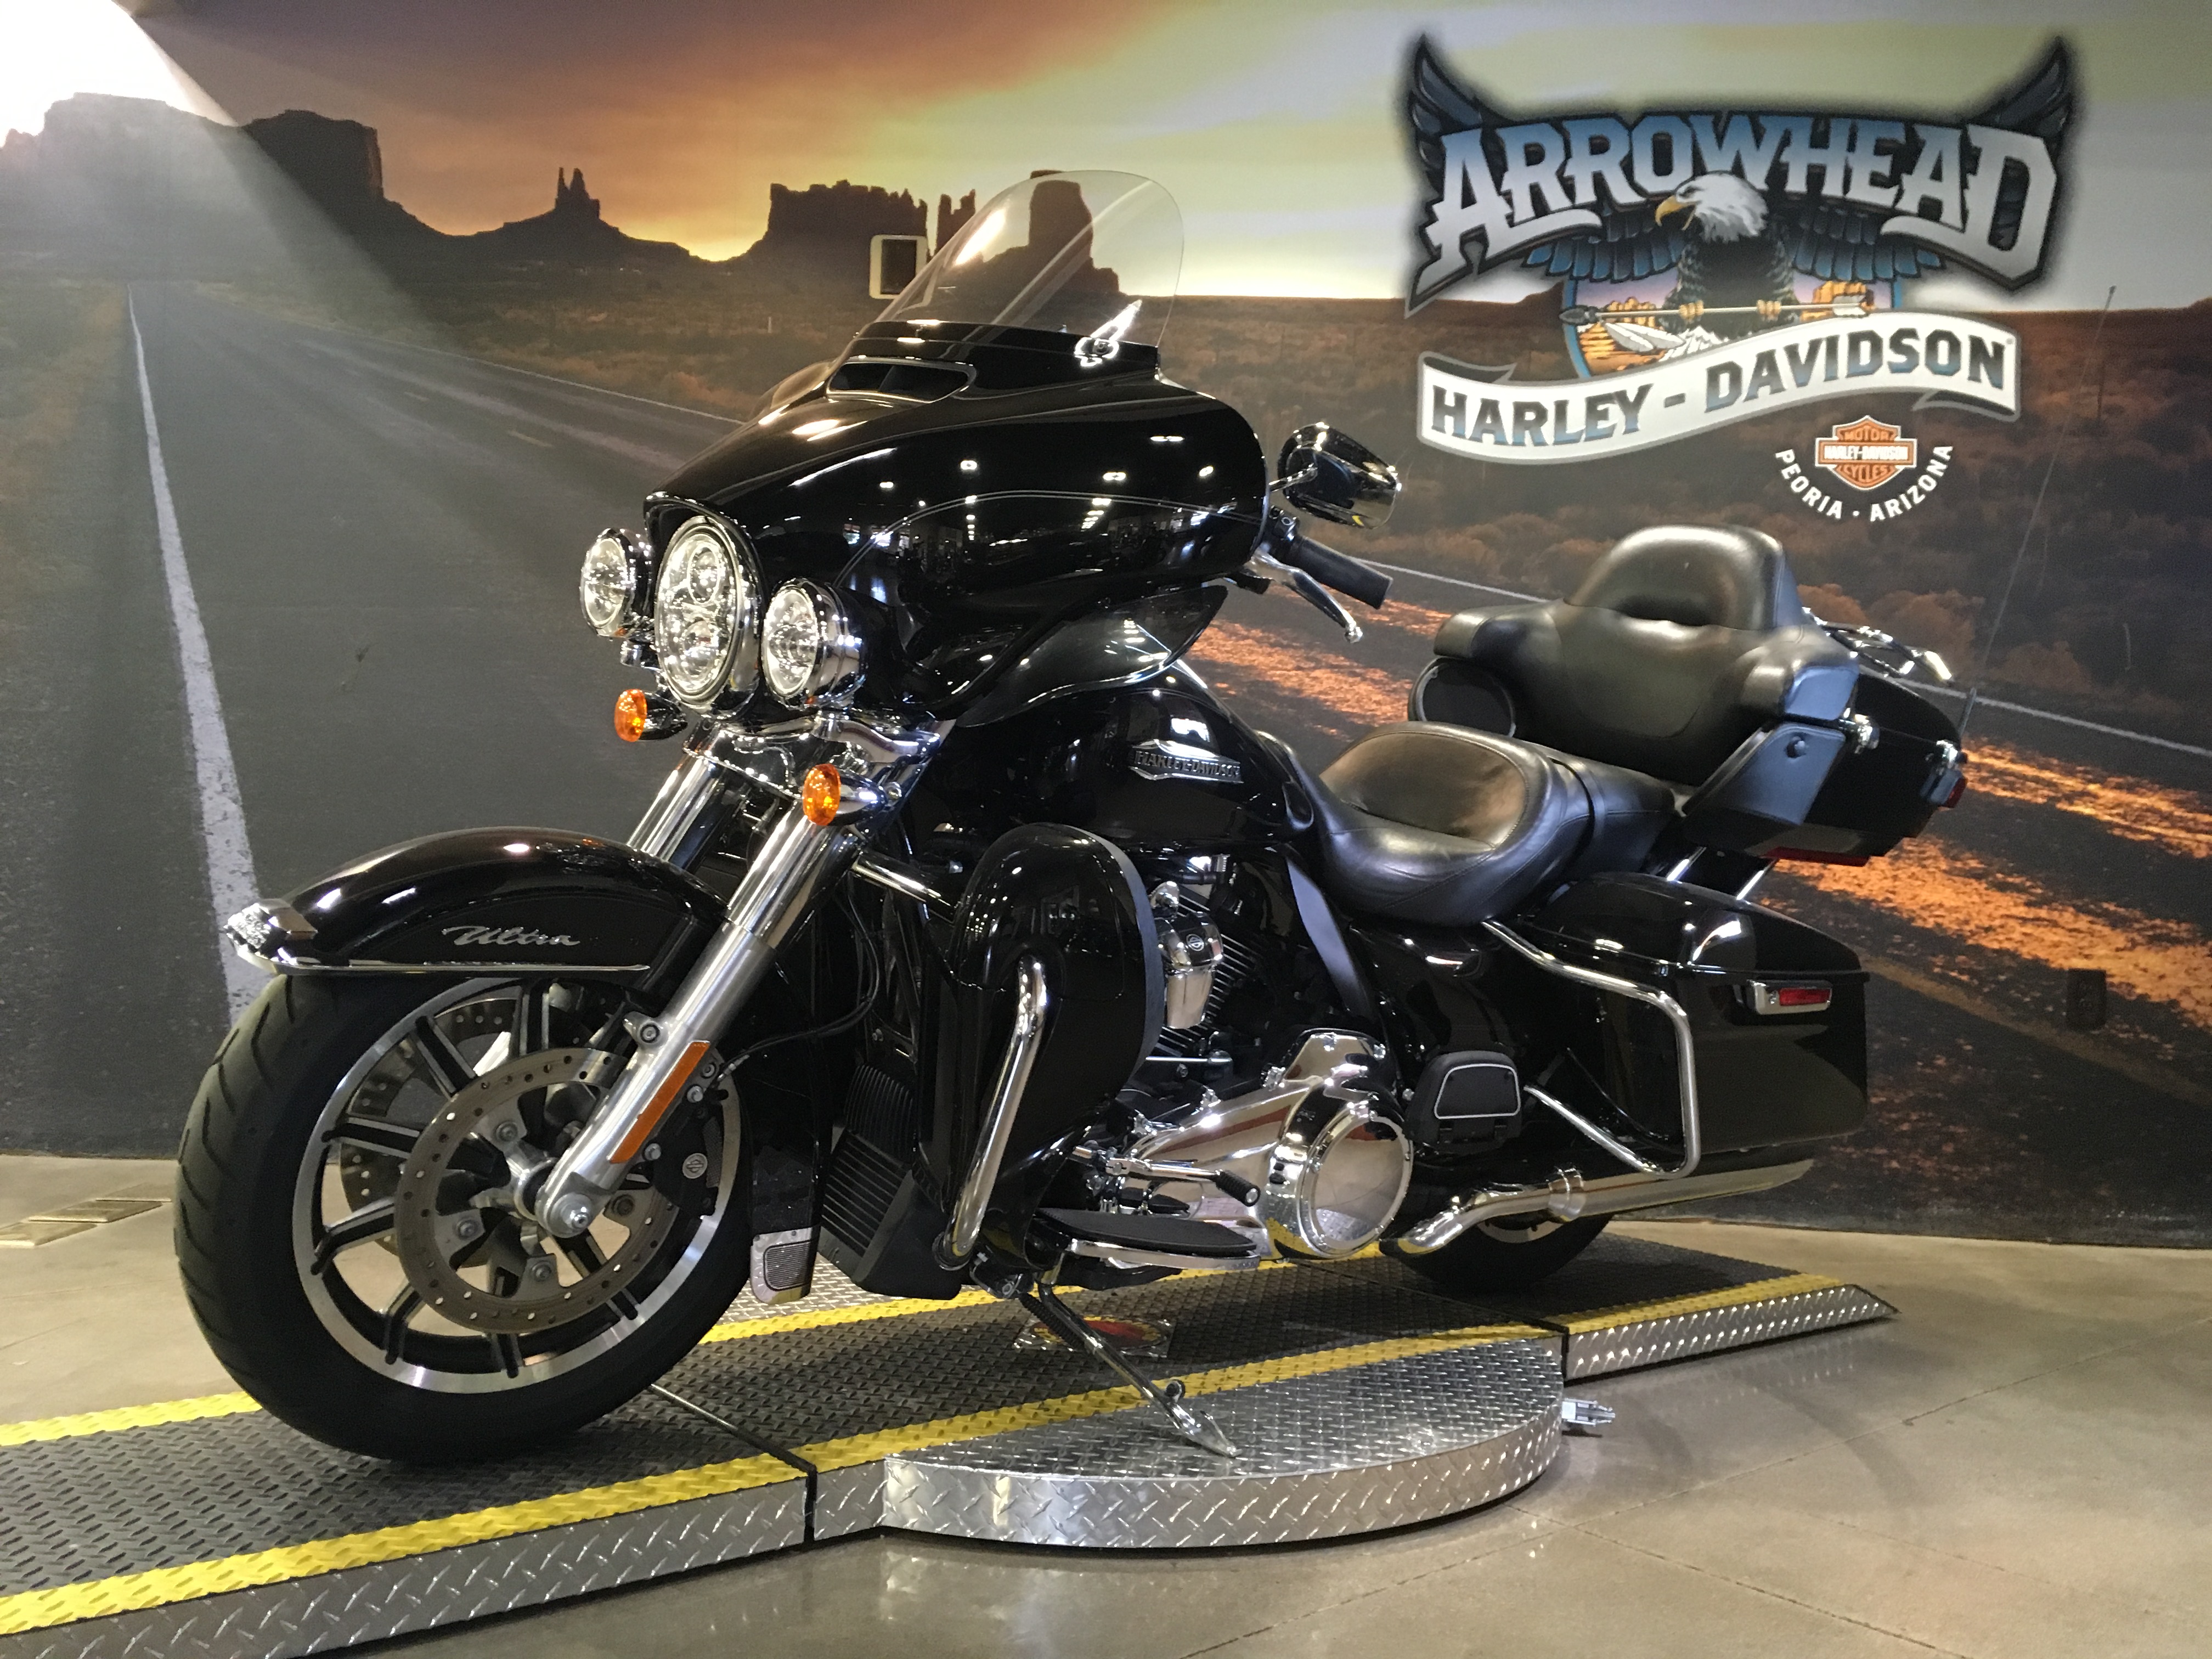 Pre-Owned 2018 Harley-Davidson Electra Glide Ultra Classic in Peoria #